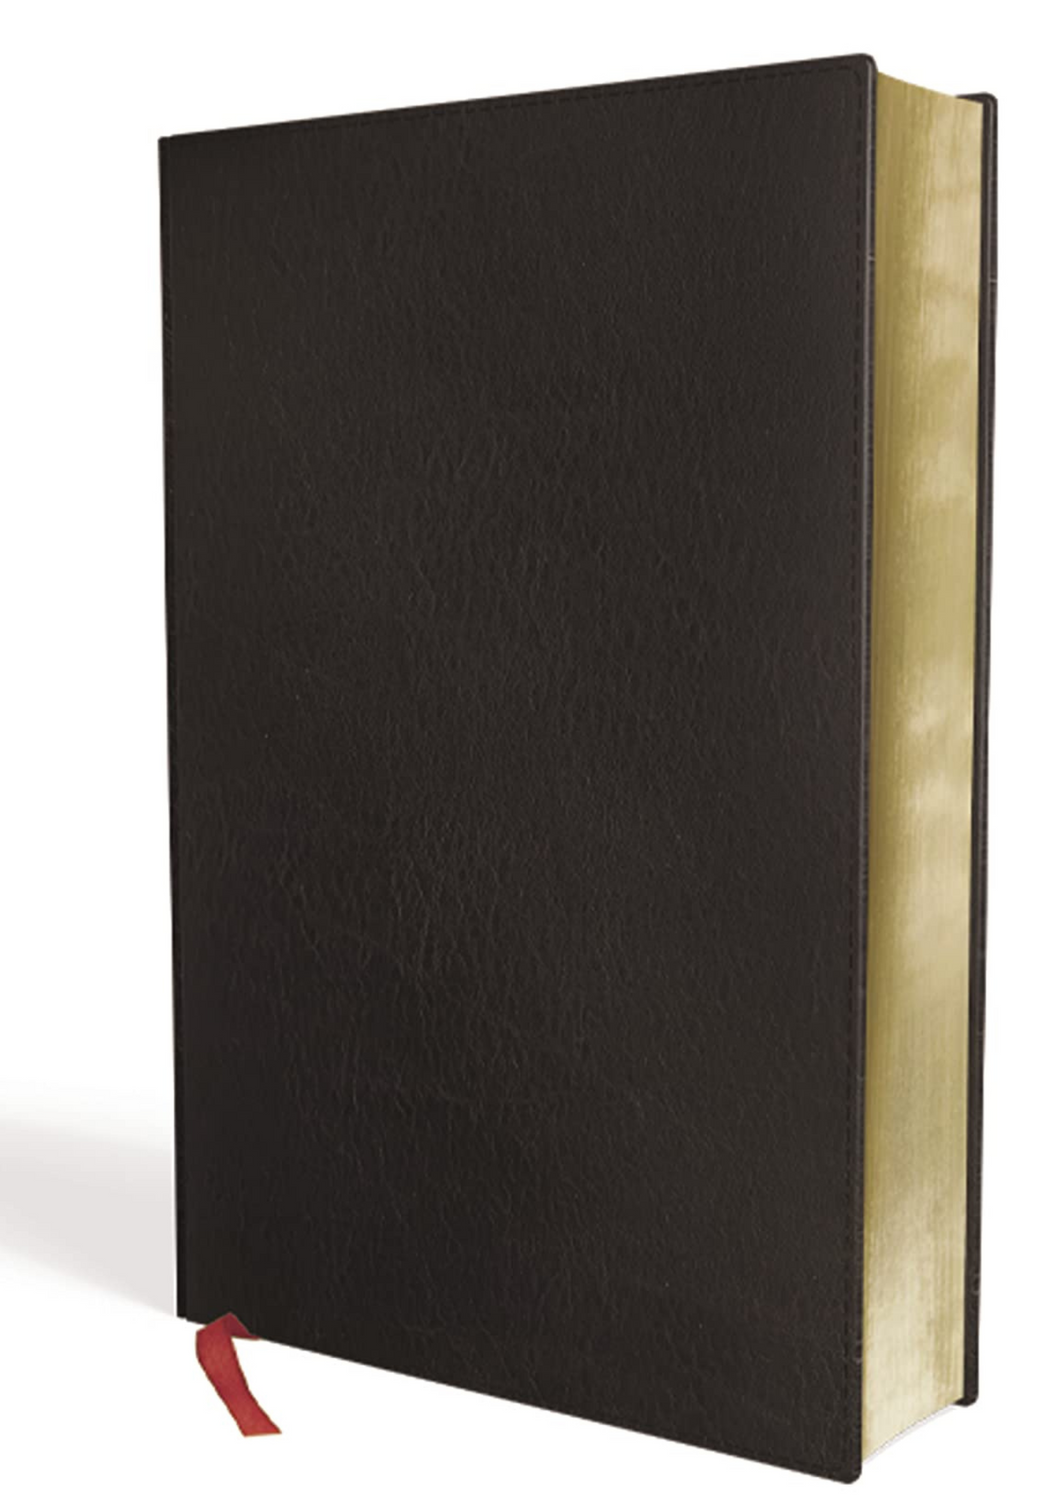 KJV, Thompson Chain-Reference Bible, Handy Size, Bonded Leather, Black, Red Letter: King James Version, Black, Bonded Leather, Handy Size, Red Letter Bonded Leather